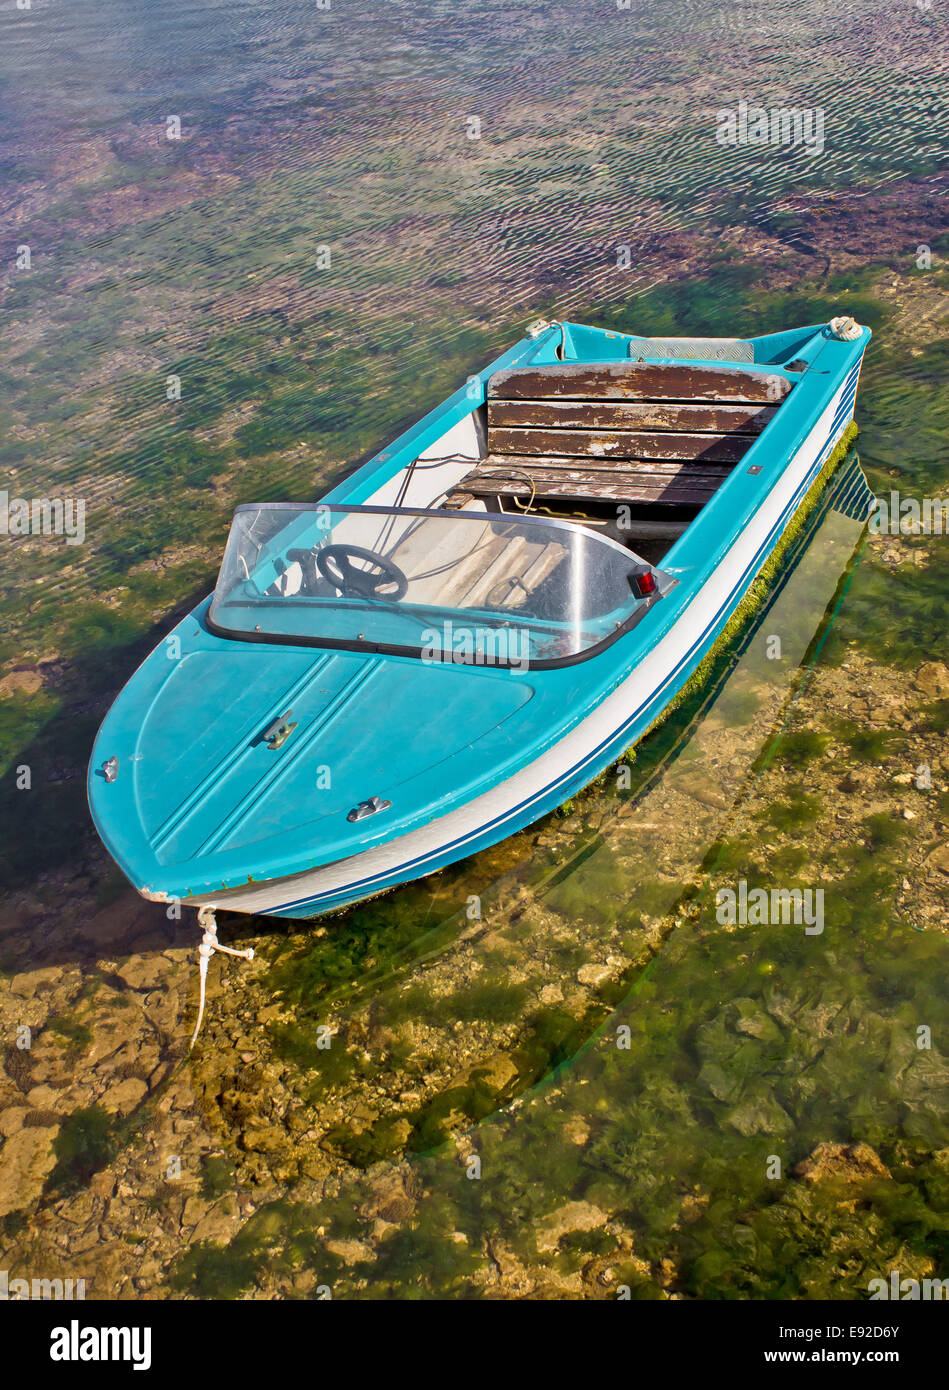 Blue boat tied up in shallow sea Stock Photo